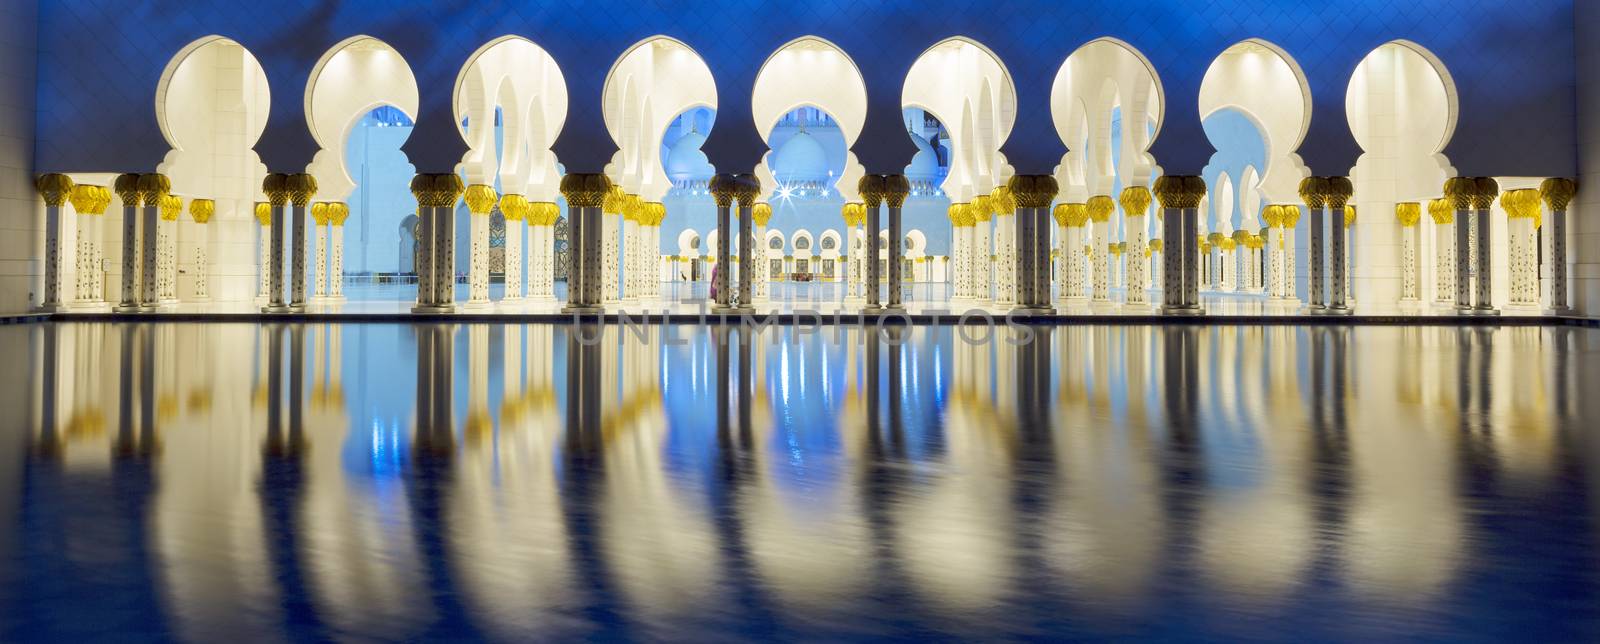 Part of Abu Dhabi mosque by vwalakte